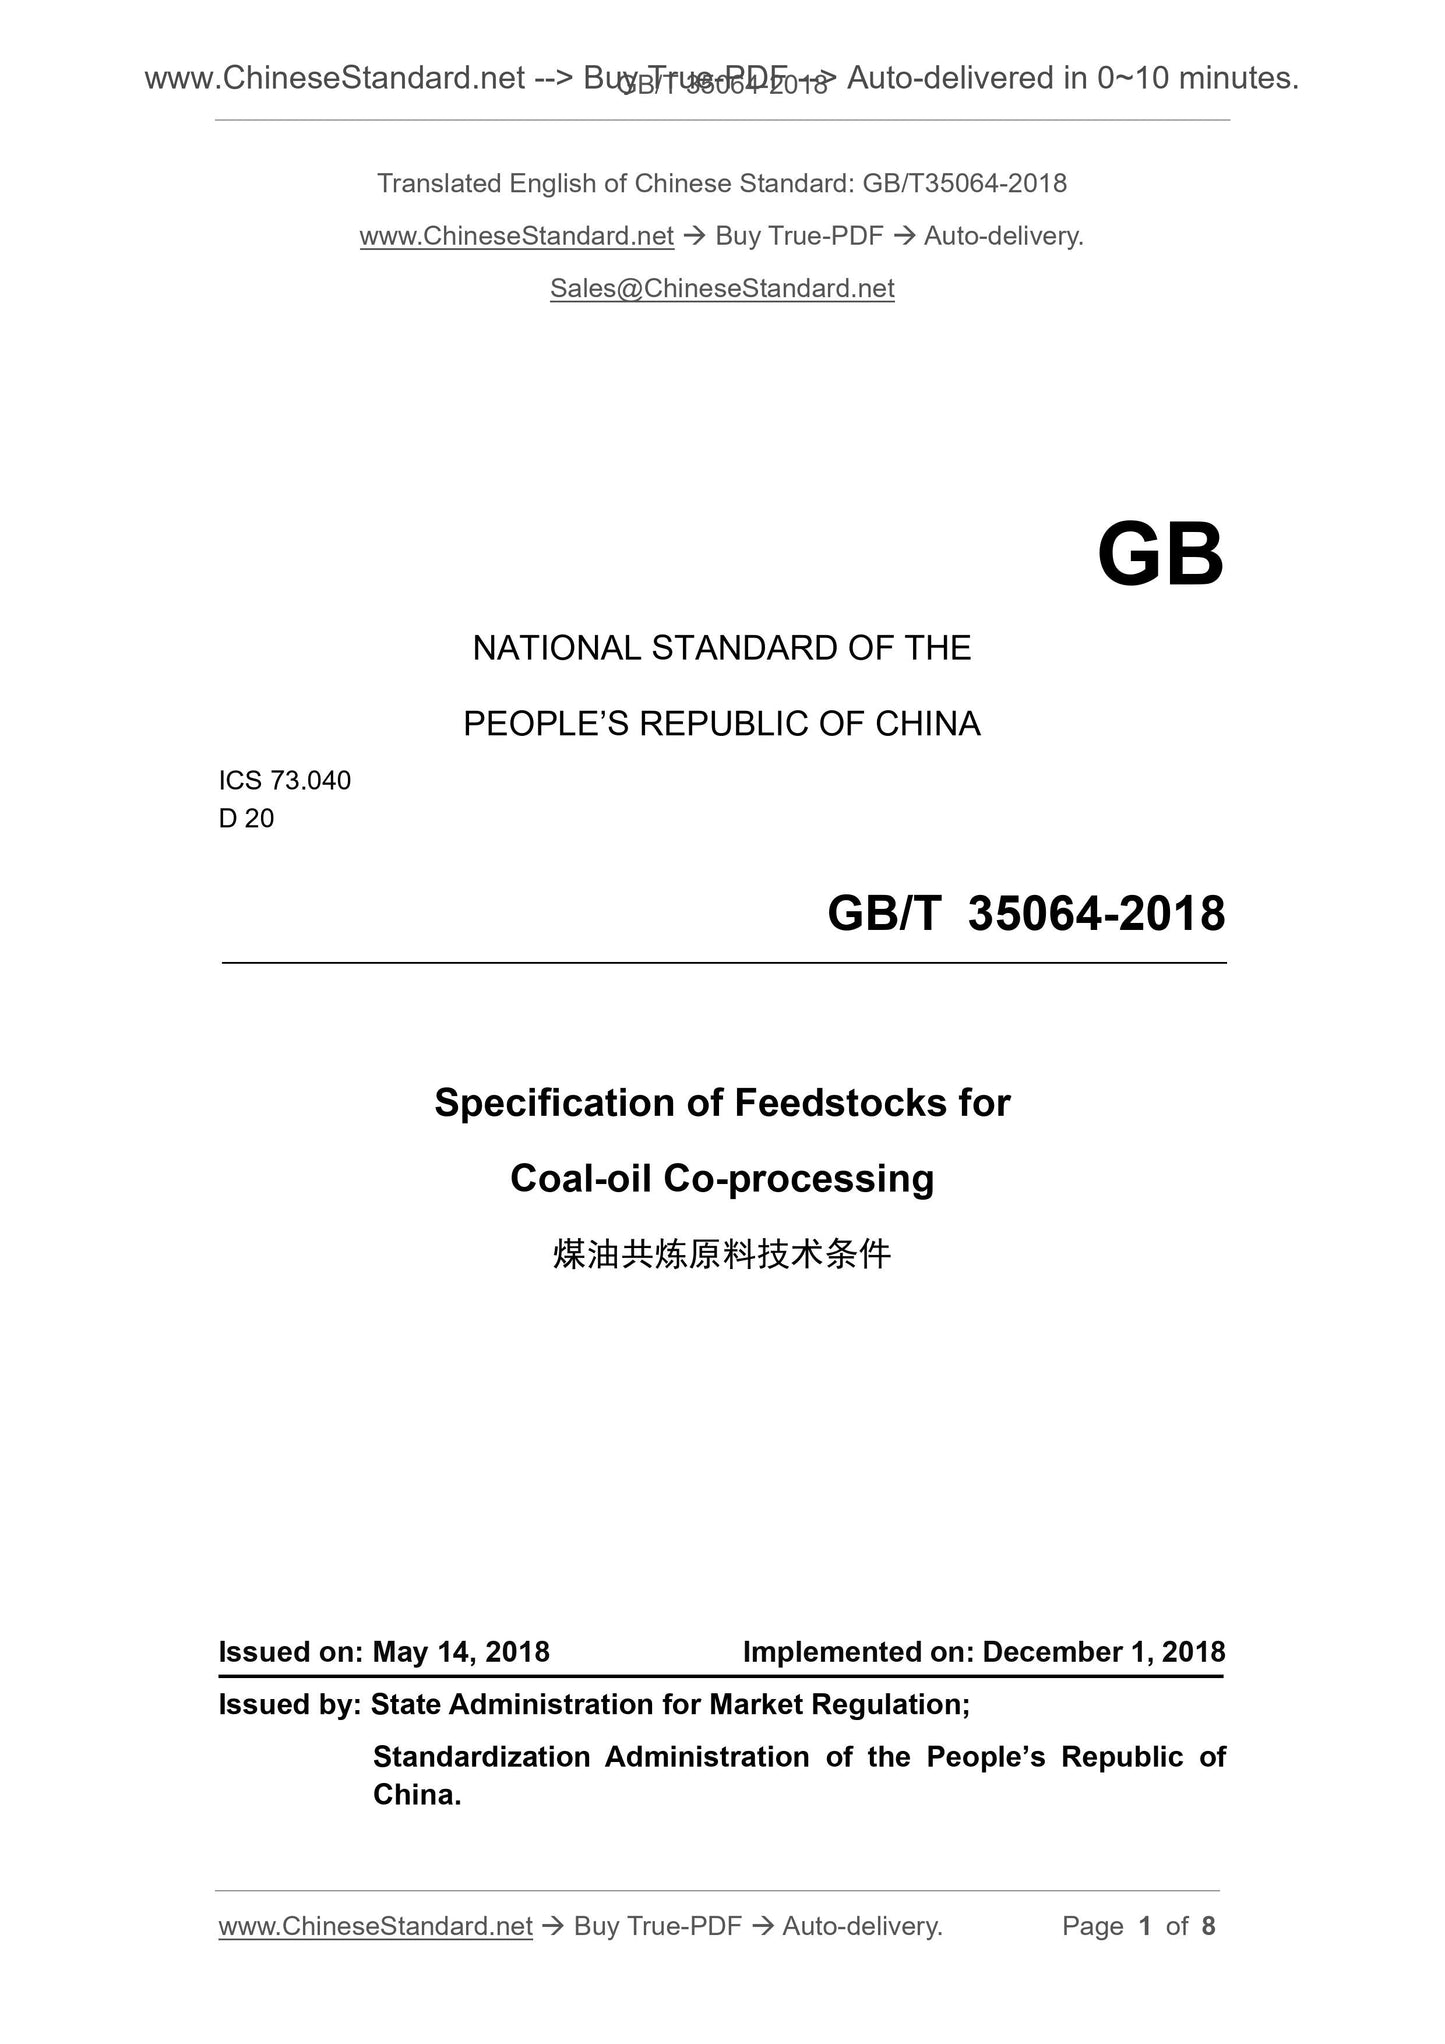 GB/T 35064-2018 Page 1